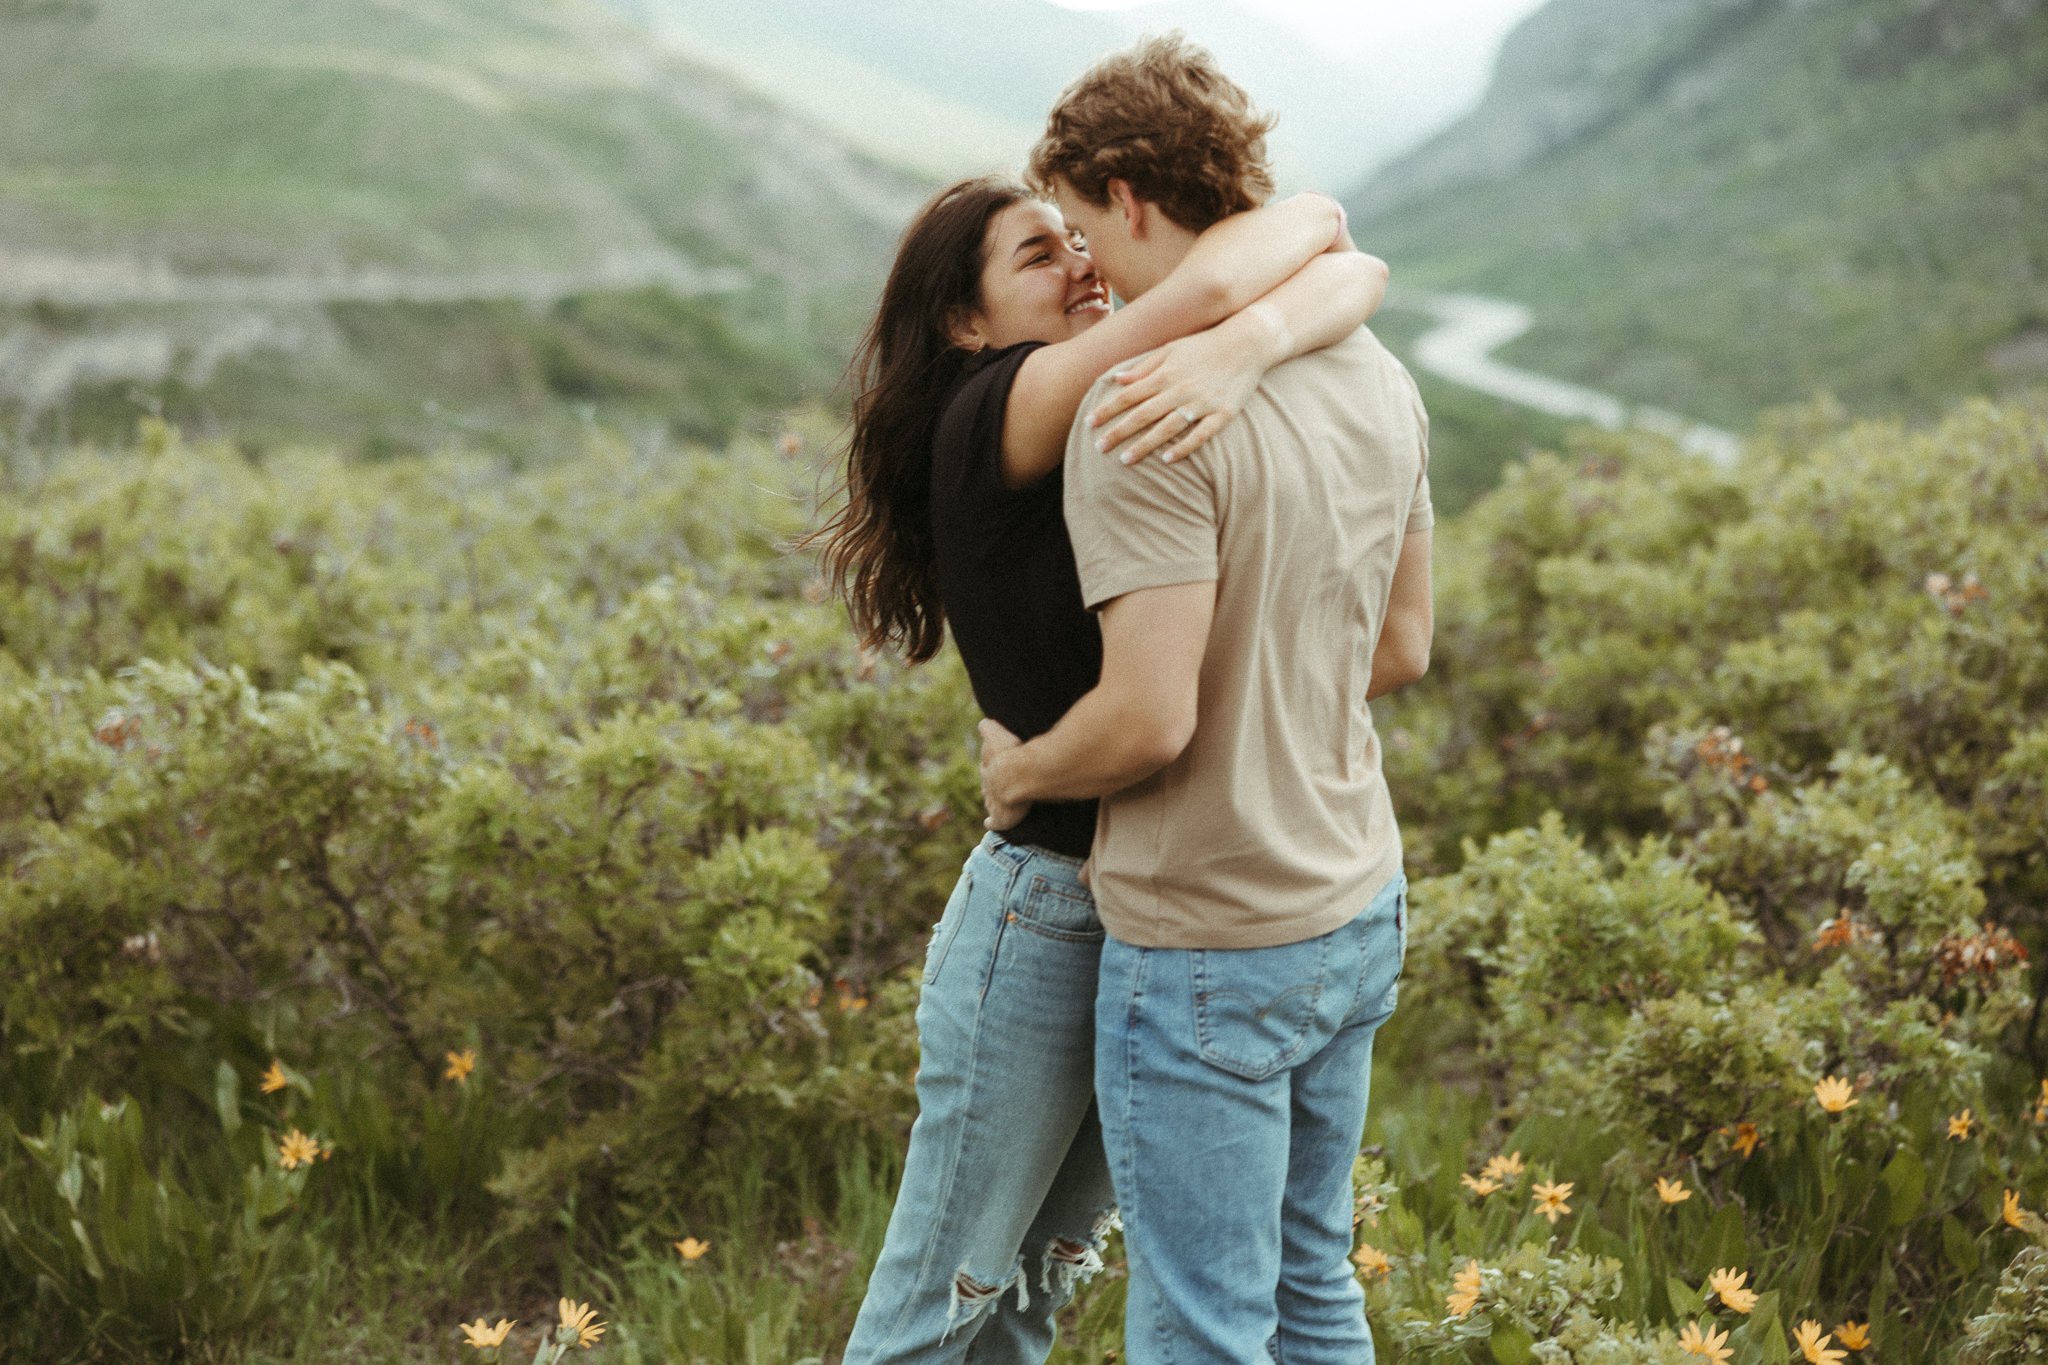 Spring-Provo-Canyon-Wildflowers-Engagement-Session-50